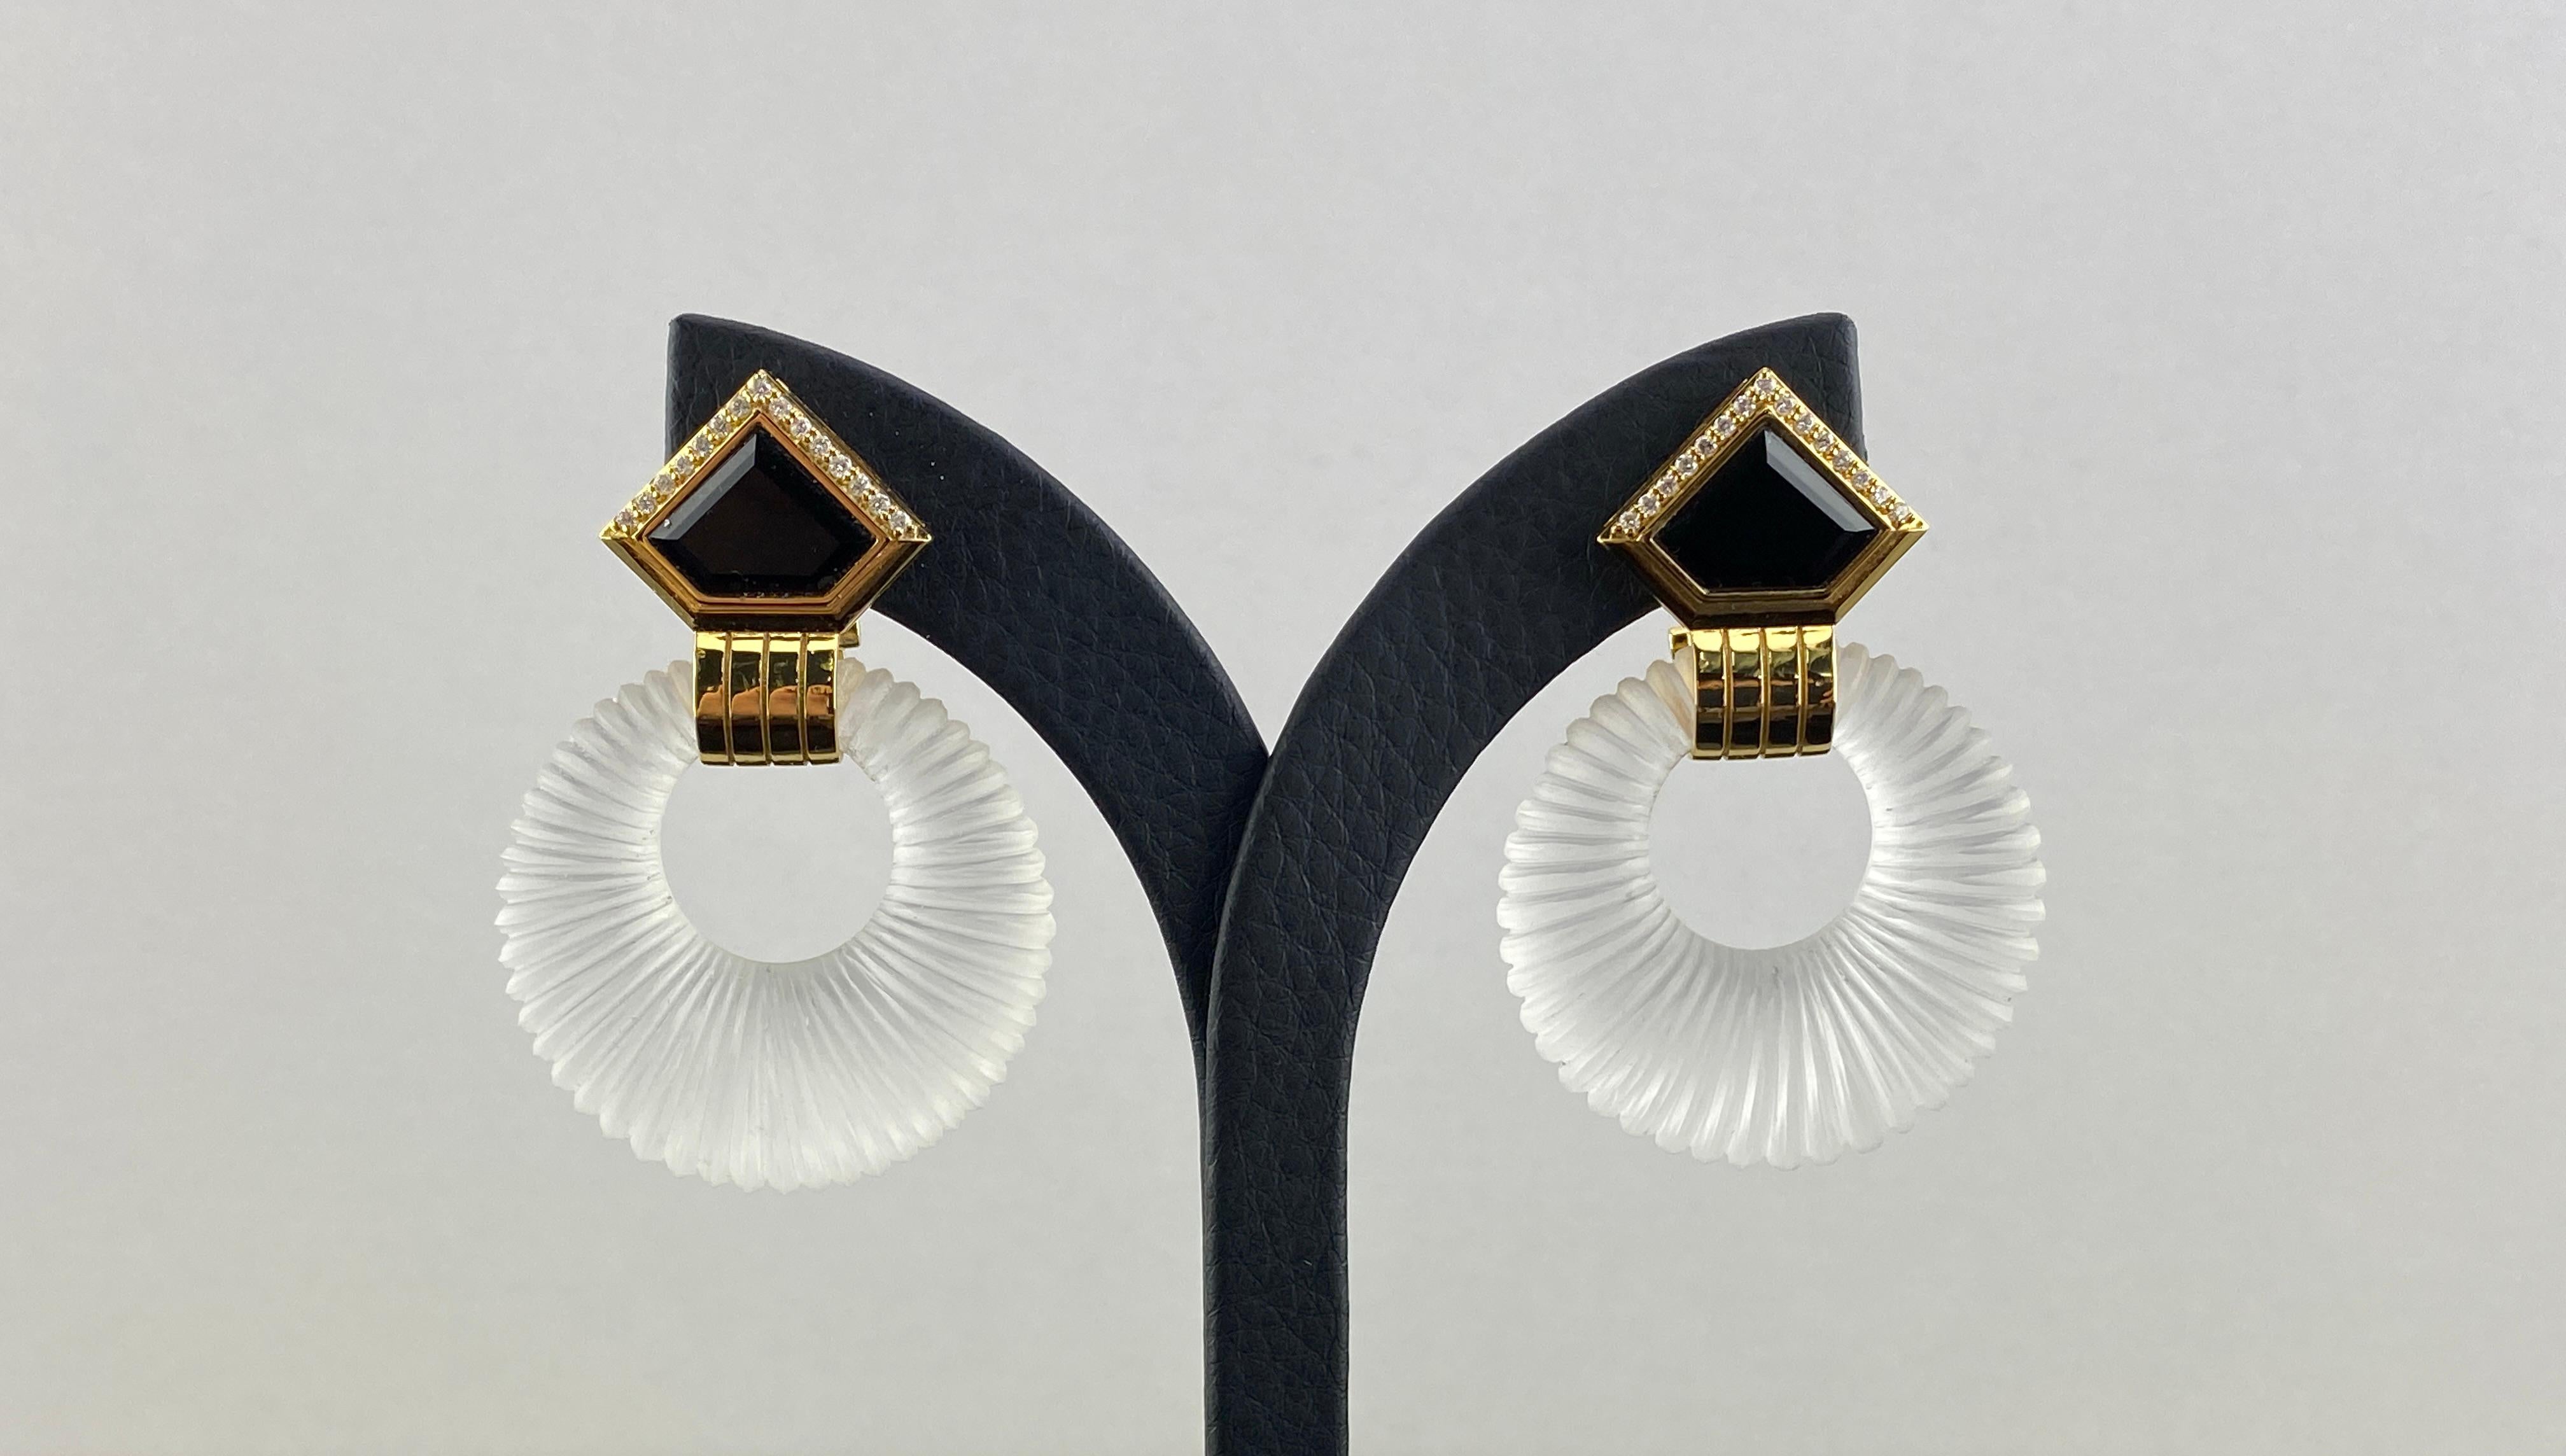 Make a statement with this pair of stylish, art-deco inspired Rock Crystal and Black Onyx earrings with White Diamonds studded in solid 18K Yellow Gold. These earrings come with an omega backing, which gives the earrings more support.
We offer free